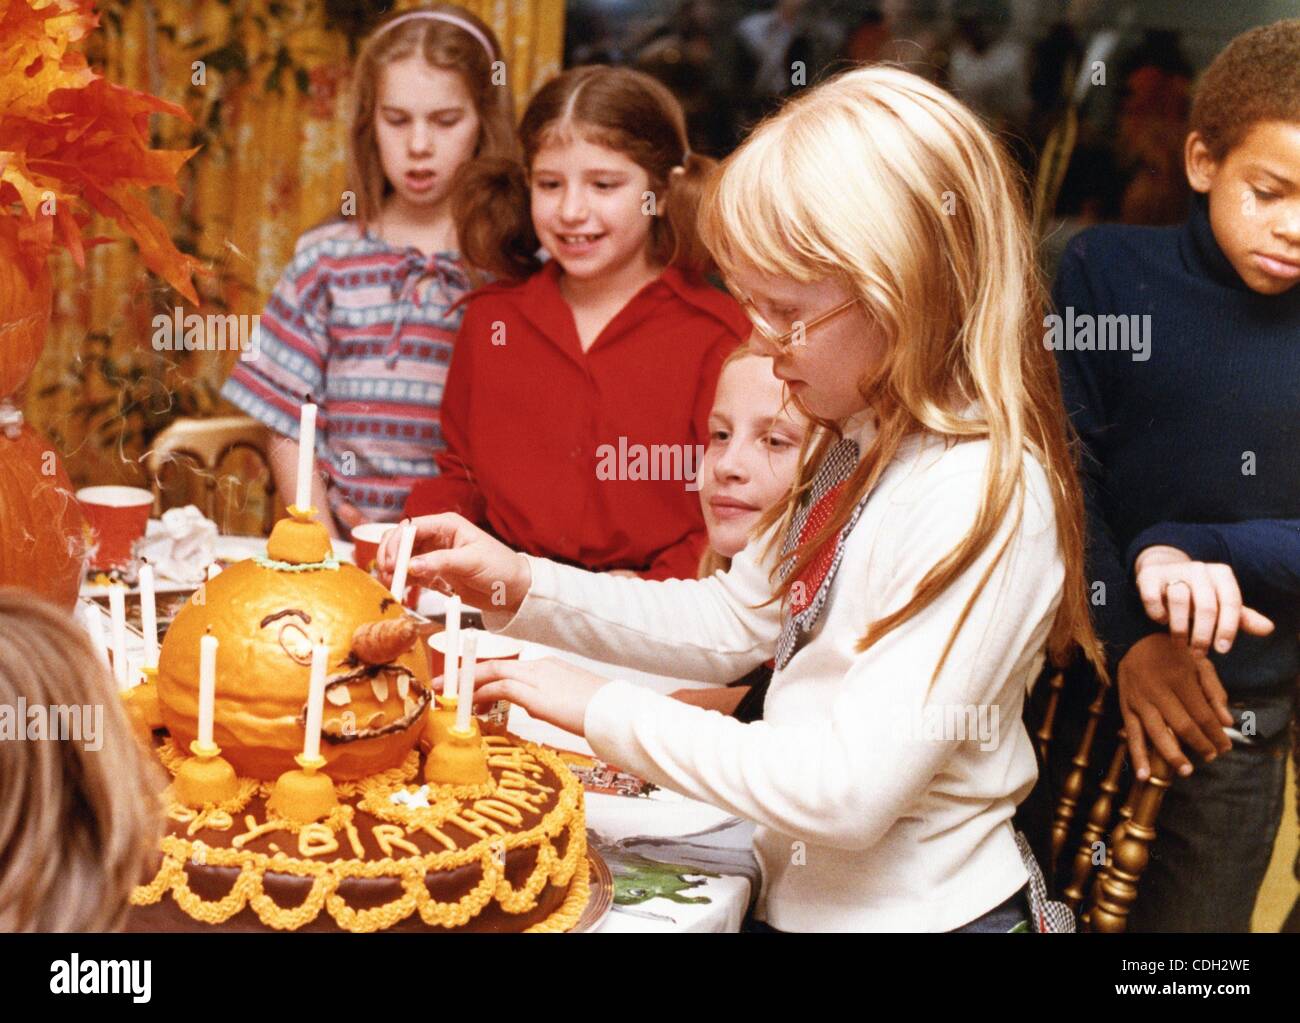 Jan. 26, 2011 - Washington, DISTRICT OF COLUMBIA, U.S. - (FILE) A file picture dated 19 October 1977 shows Amy Carter, the daughter of US President Jimmy Carter, celebrating her 10th birthday at The White House in Washington, DC, USA. (Credit Image: © Carter Archives/ZUMAPRESS.com) Stock Photo